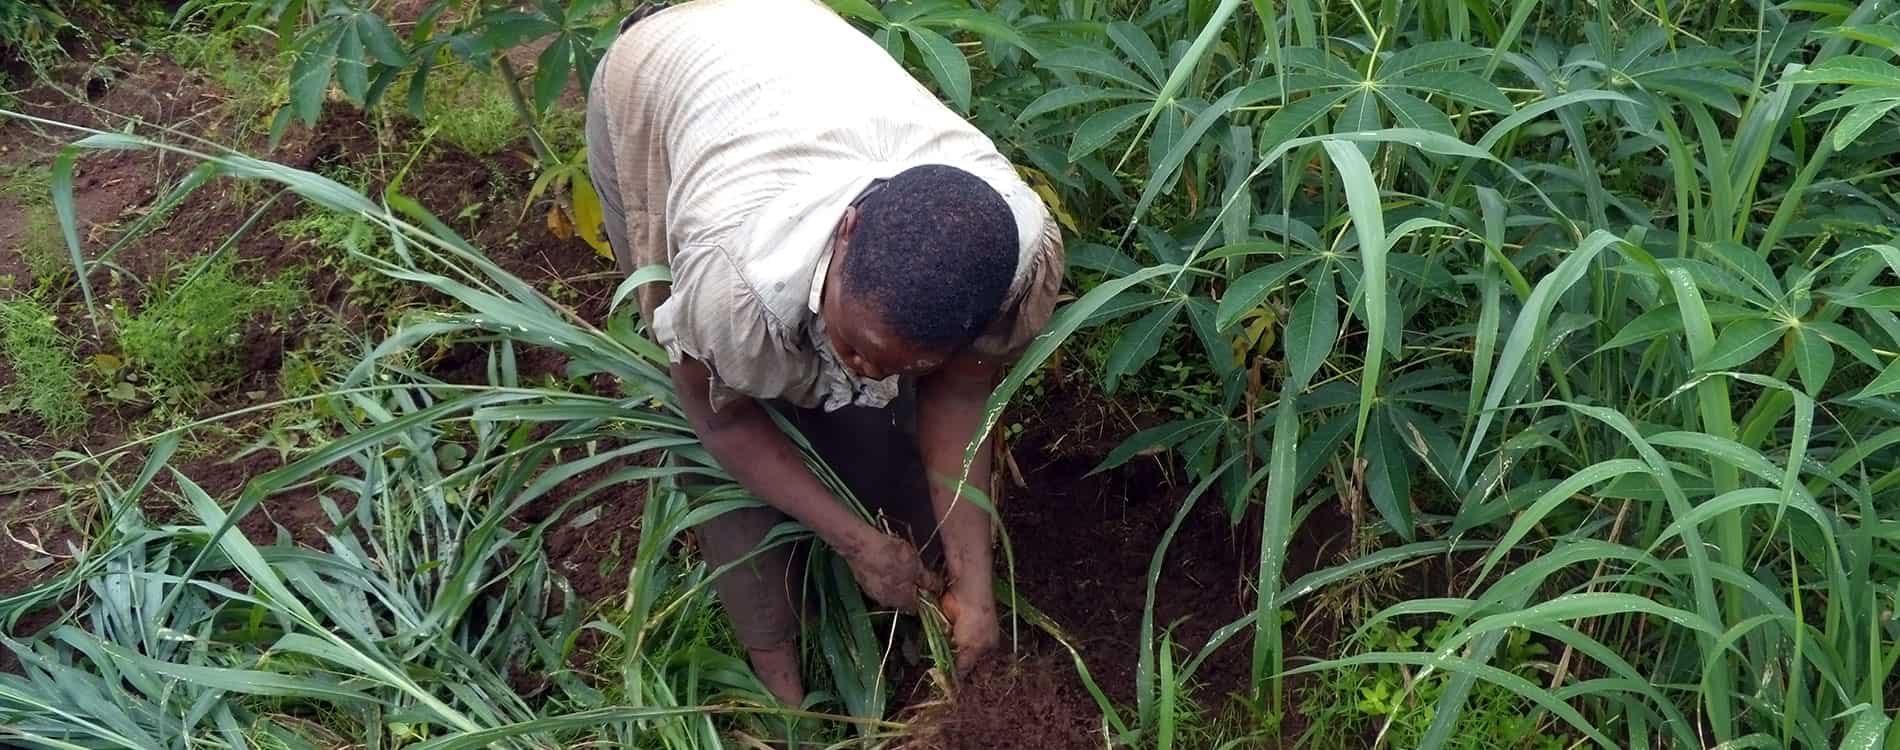 Manual weeding is labour intensive and cumbersome which causes farmers to delay weeding their cassava fields. Weeds account for over 30% in yeild loss